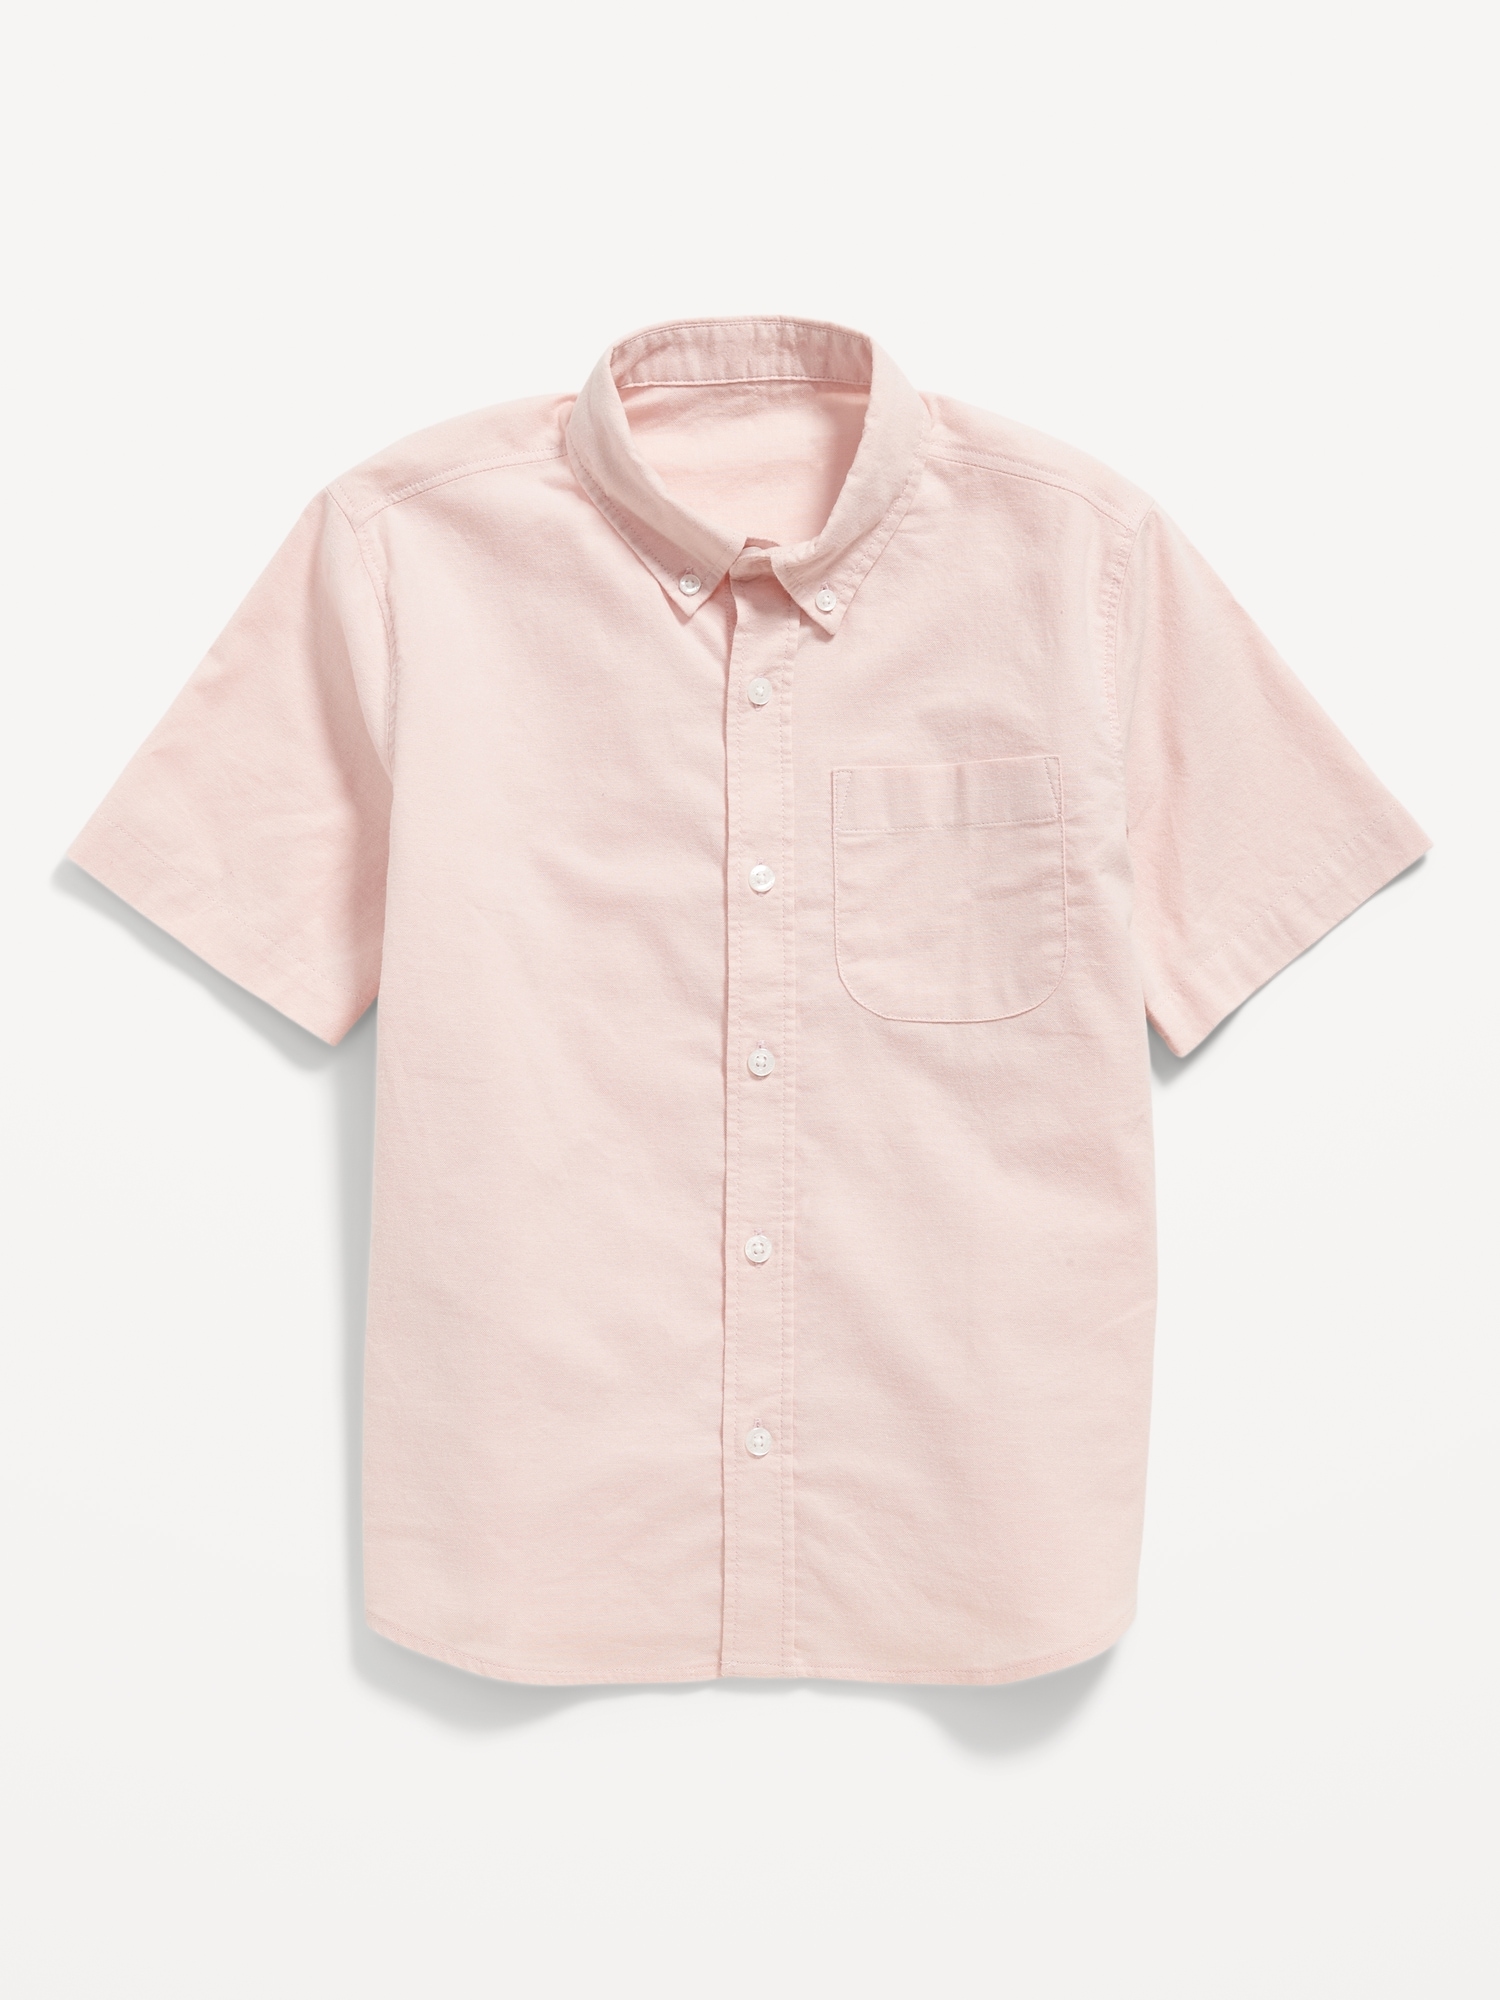 Old Navy Short-Sleeve Oxford Shirt for Boys pink. 1